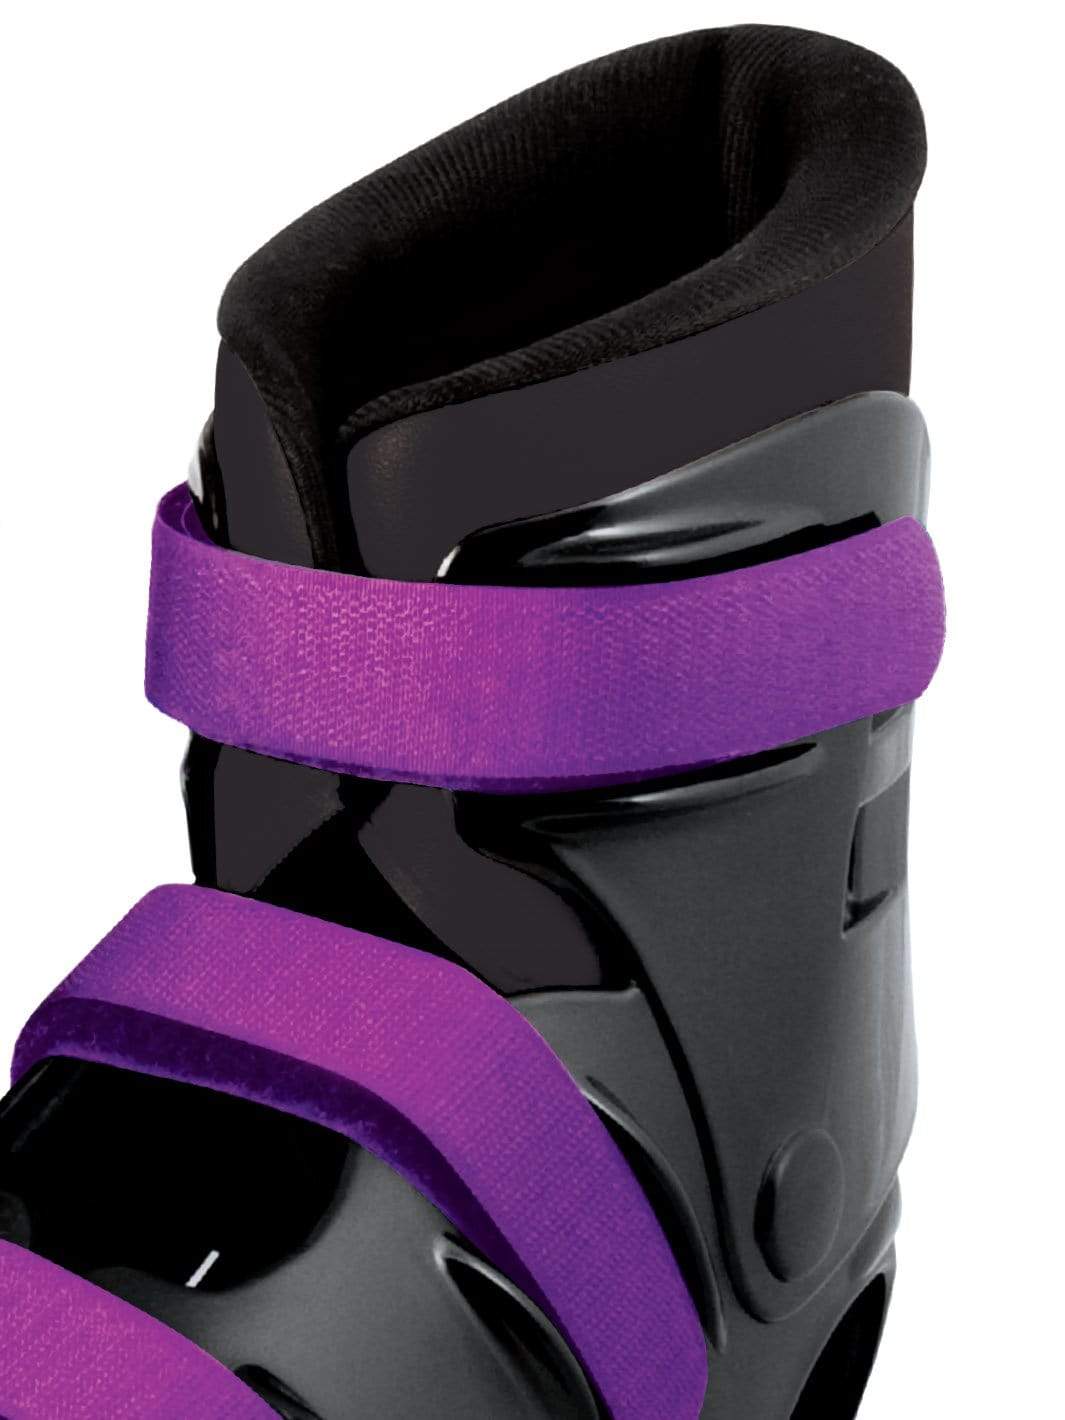 Madd Gear Boosters Boost Boots Kids Jumping Shoes Kangaroo Bouncing Kangoo Light-Up Lights LED Purple Velcro Straps